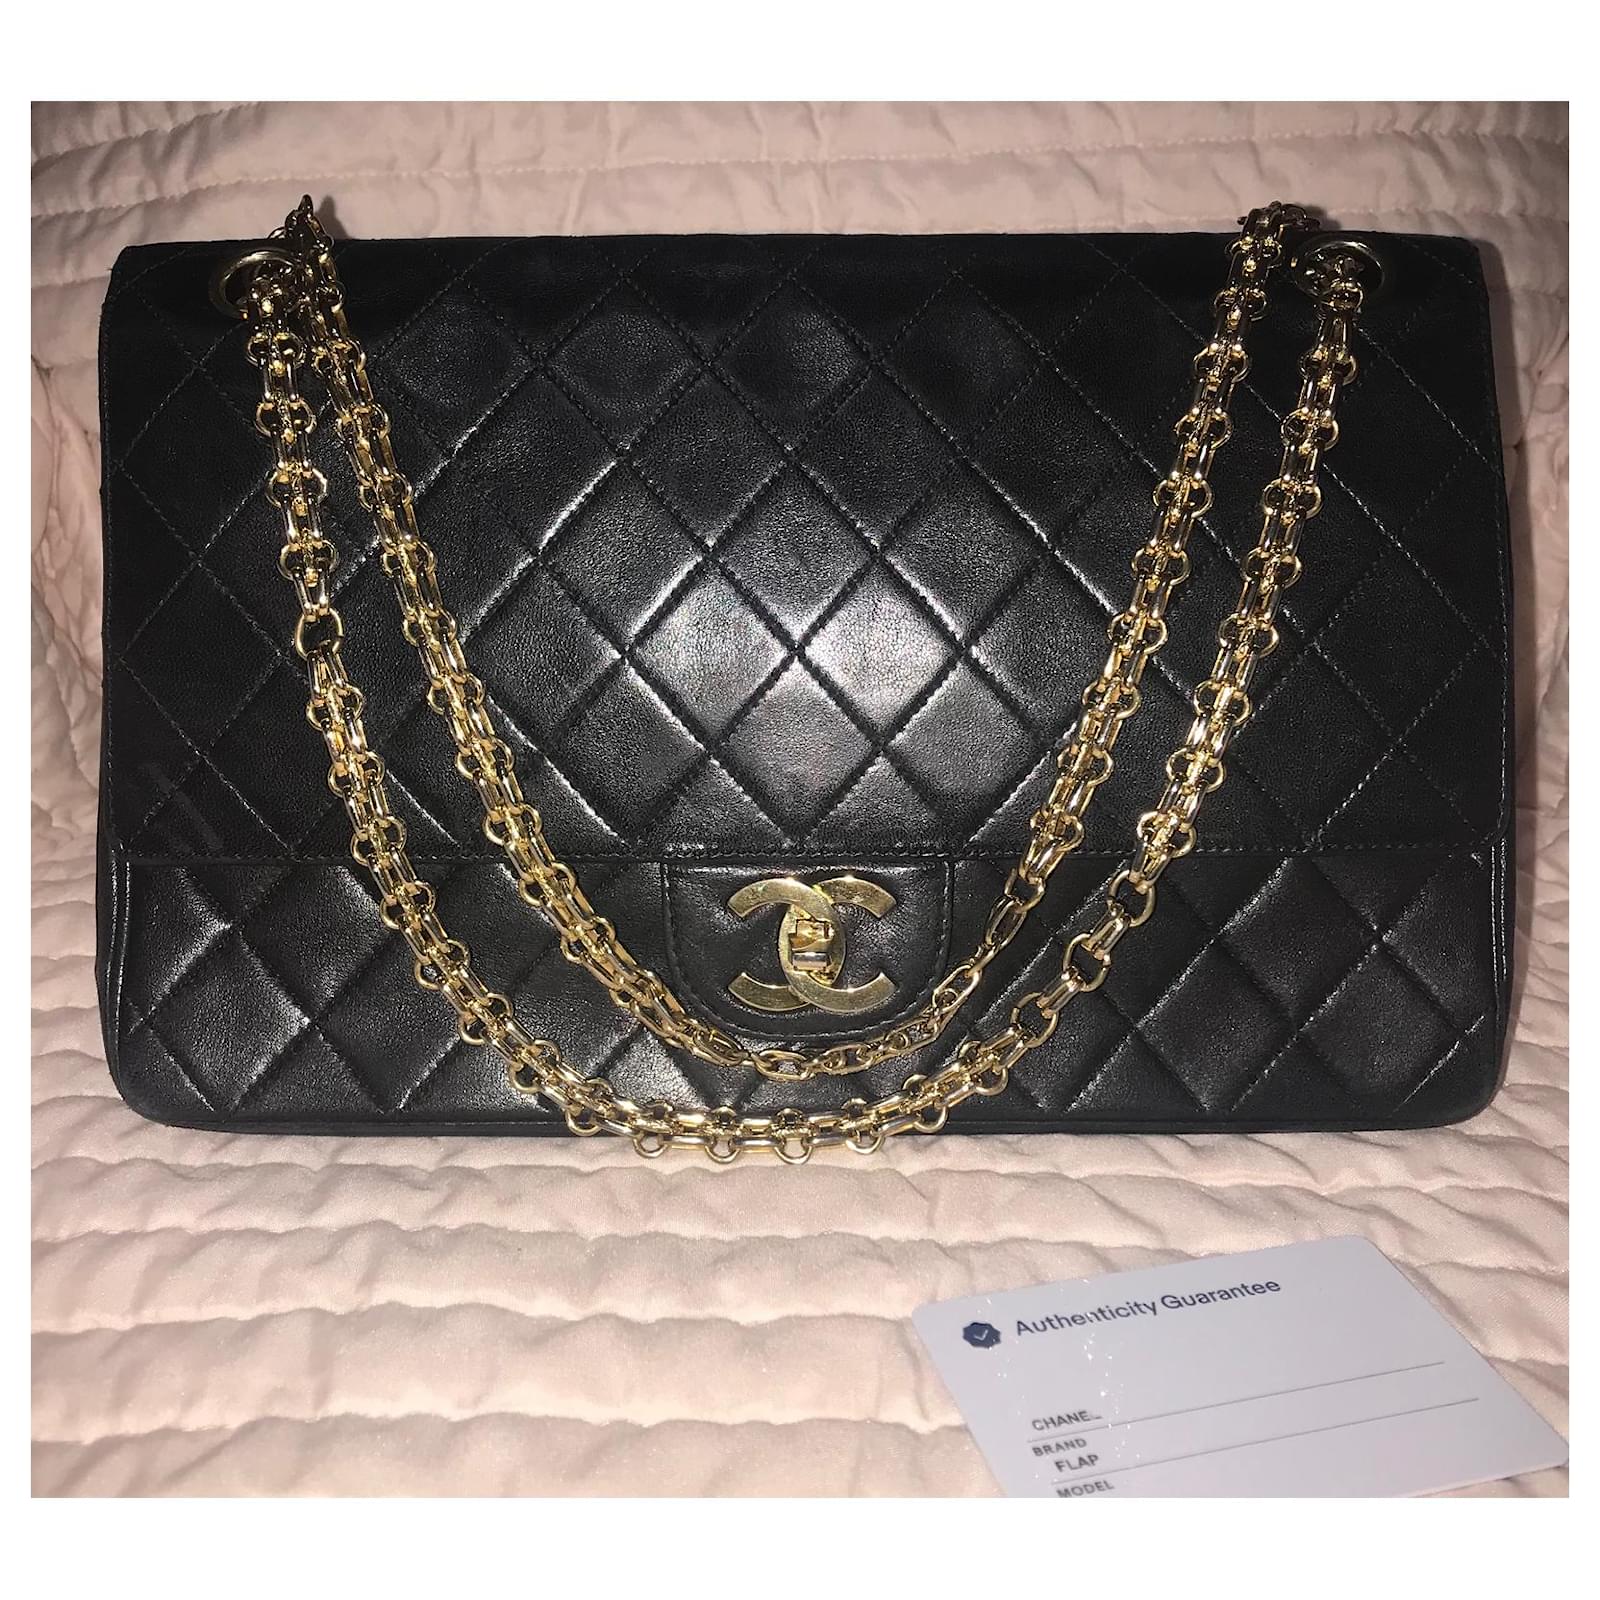 DSCENE GUIDE: Where Can I Buy Authentic Chanel Bags Online?